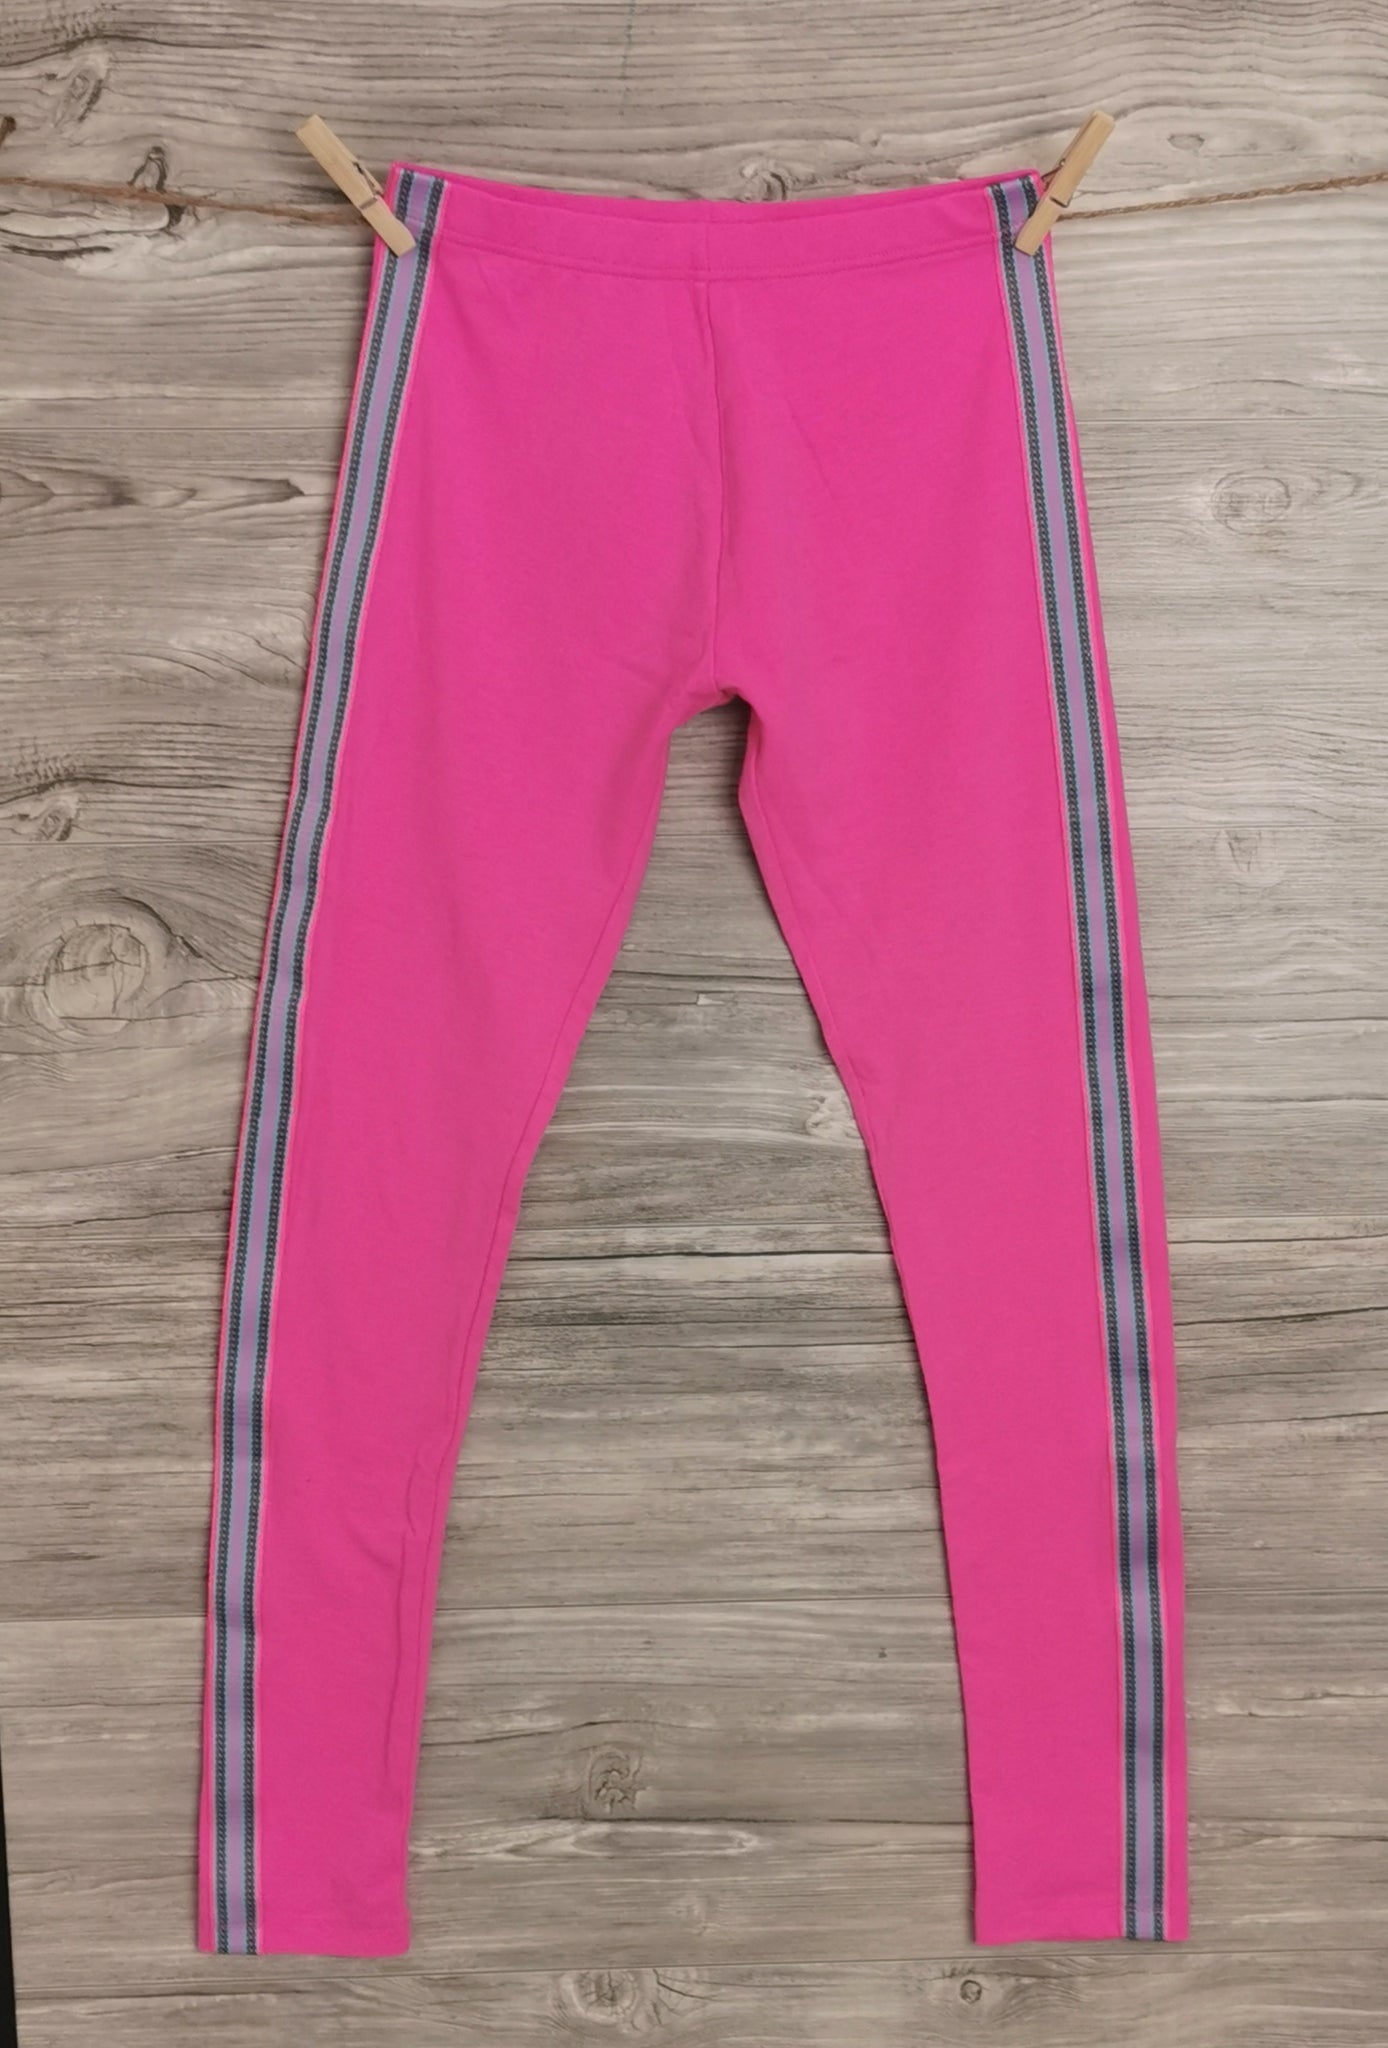 GIRL SIZE XL (14/16 YEARS) - GEORGE, Soft Pink Casual Leggings EUC B8 –  Faith and Love Thrift